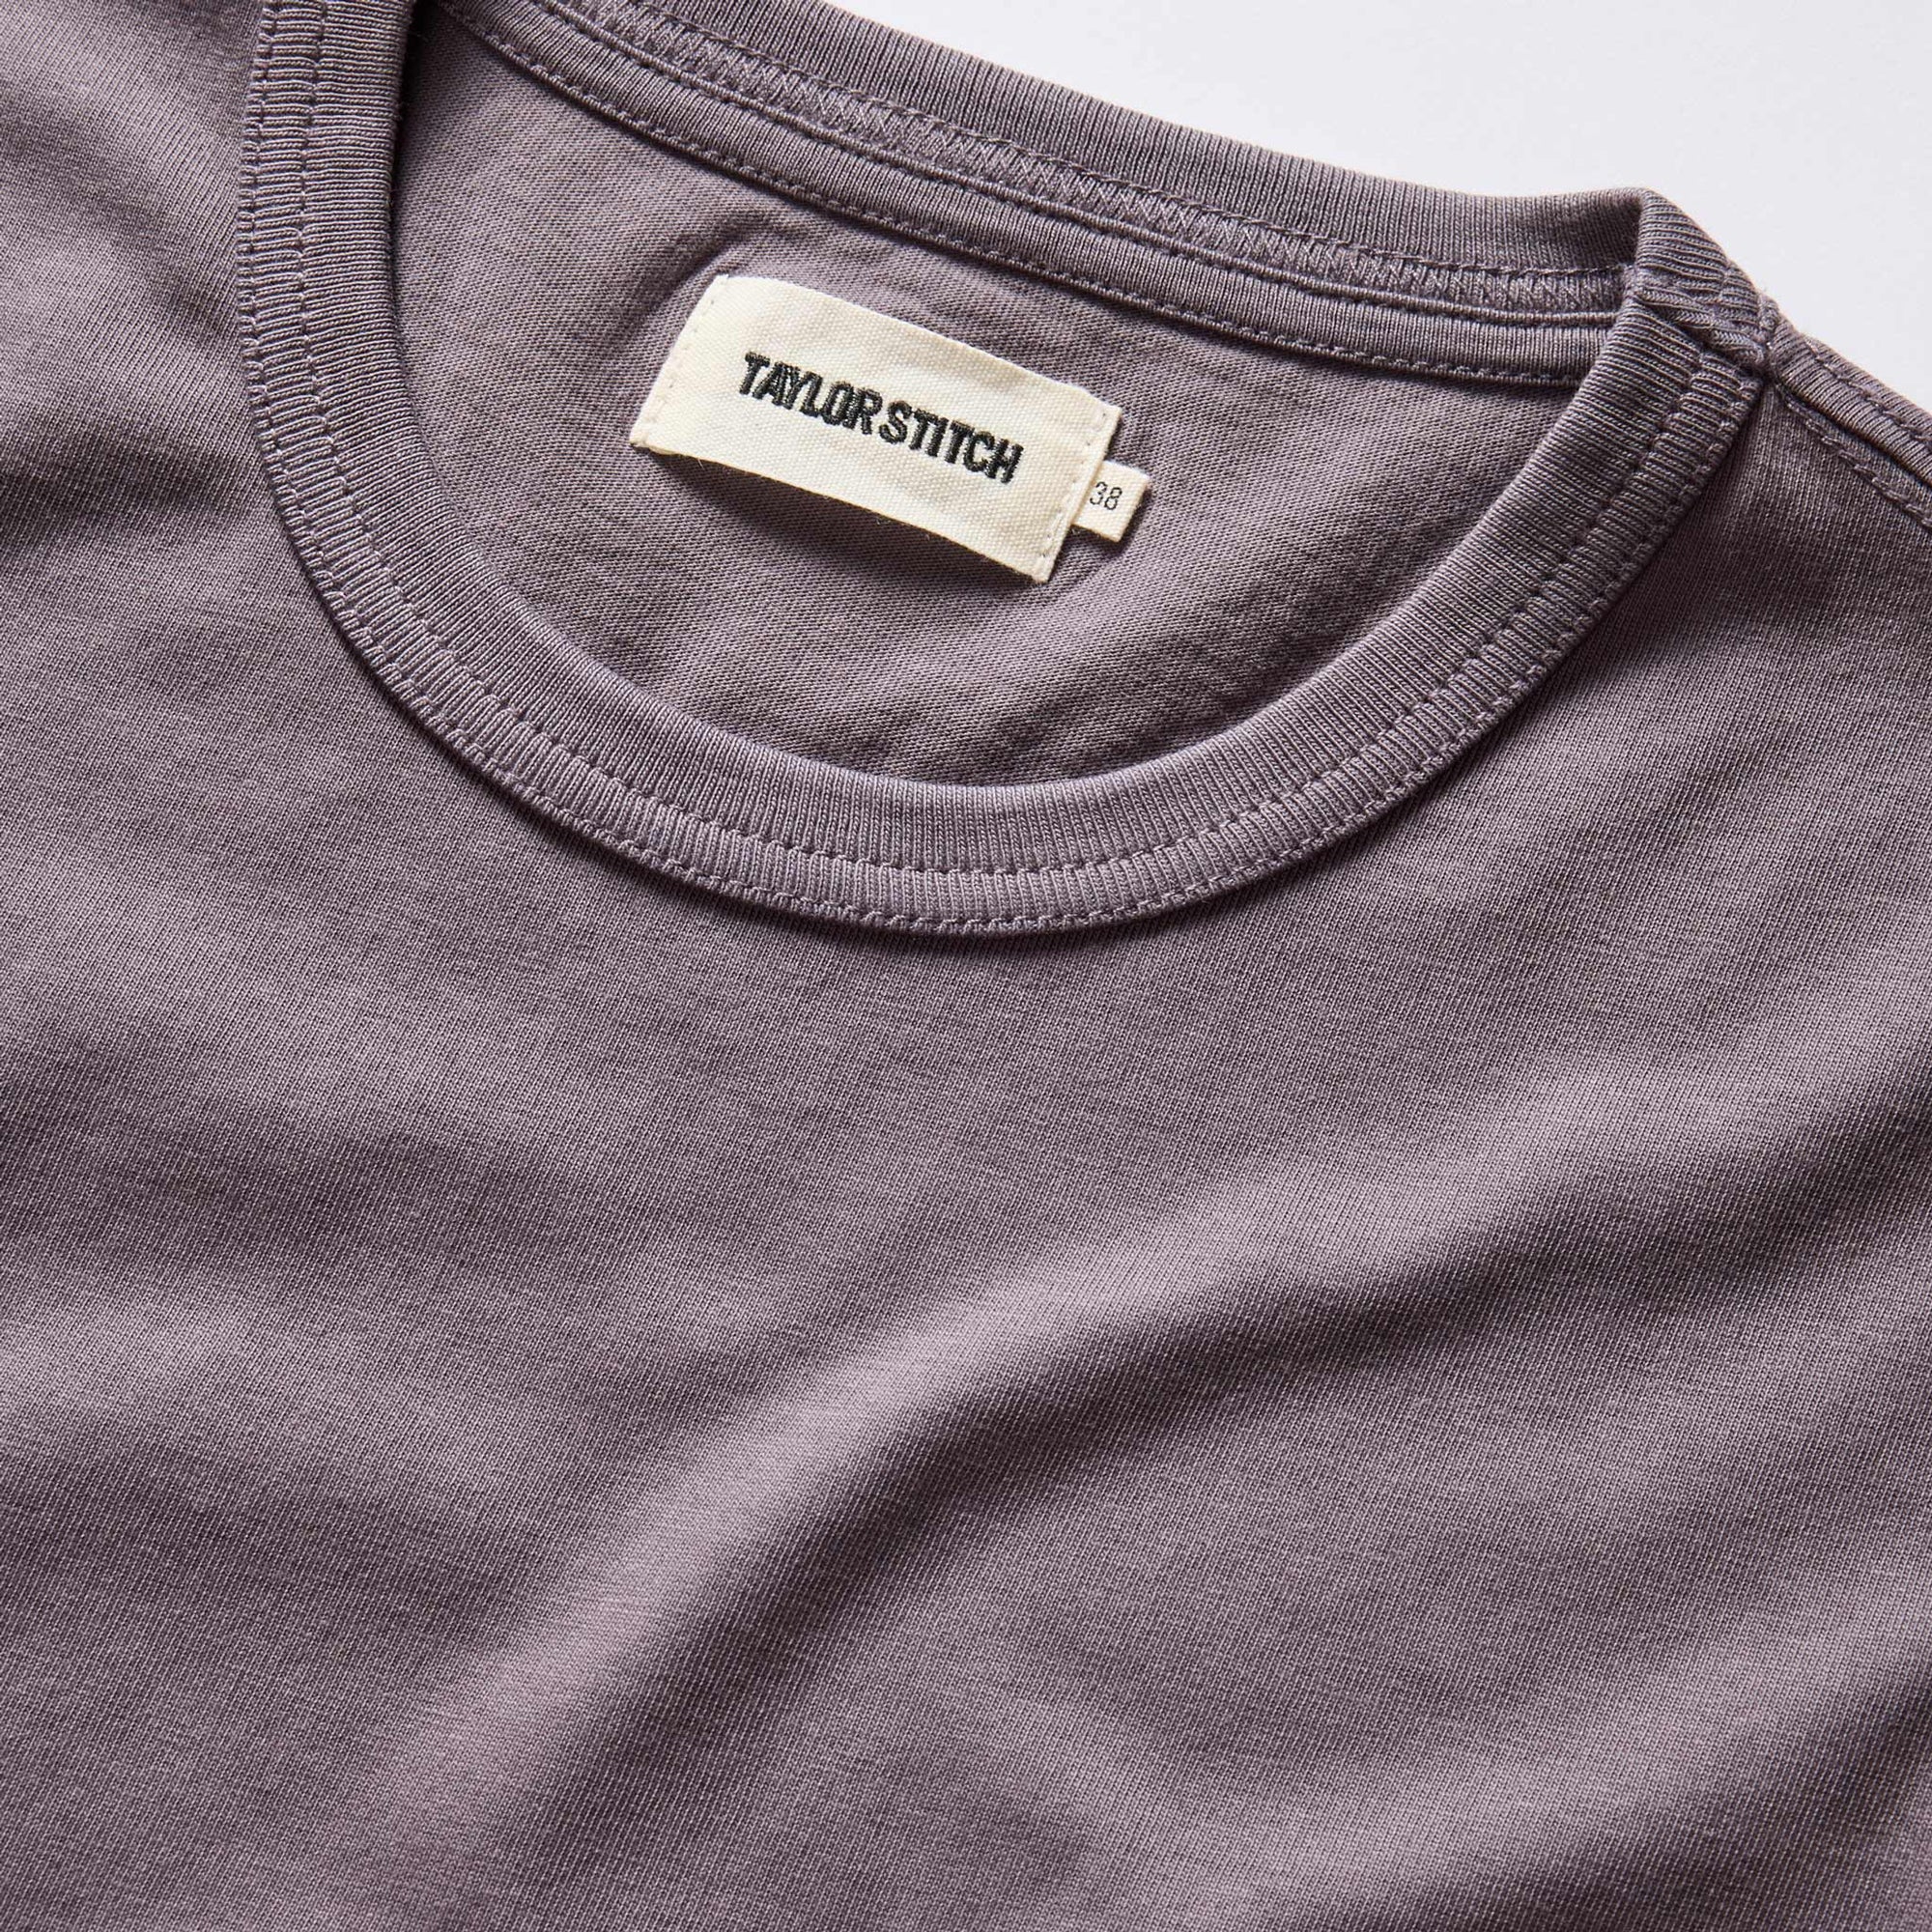 Taylor Stitch - The Organic Cotton Tee in Dried Plum